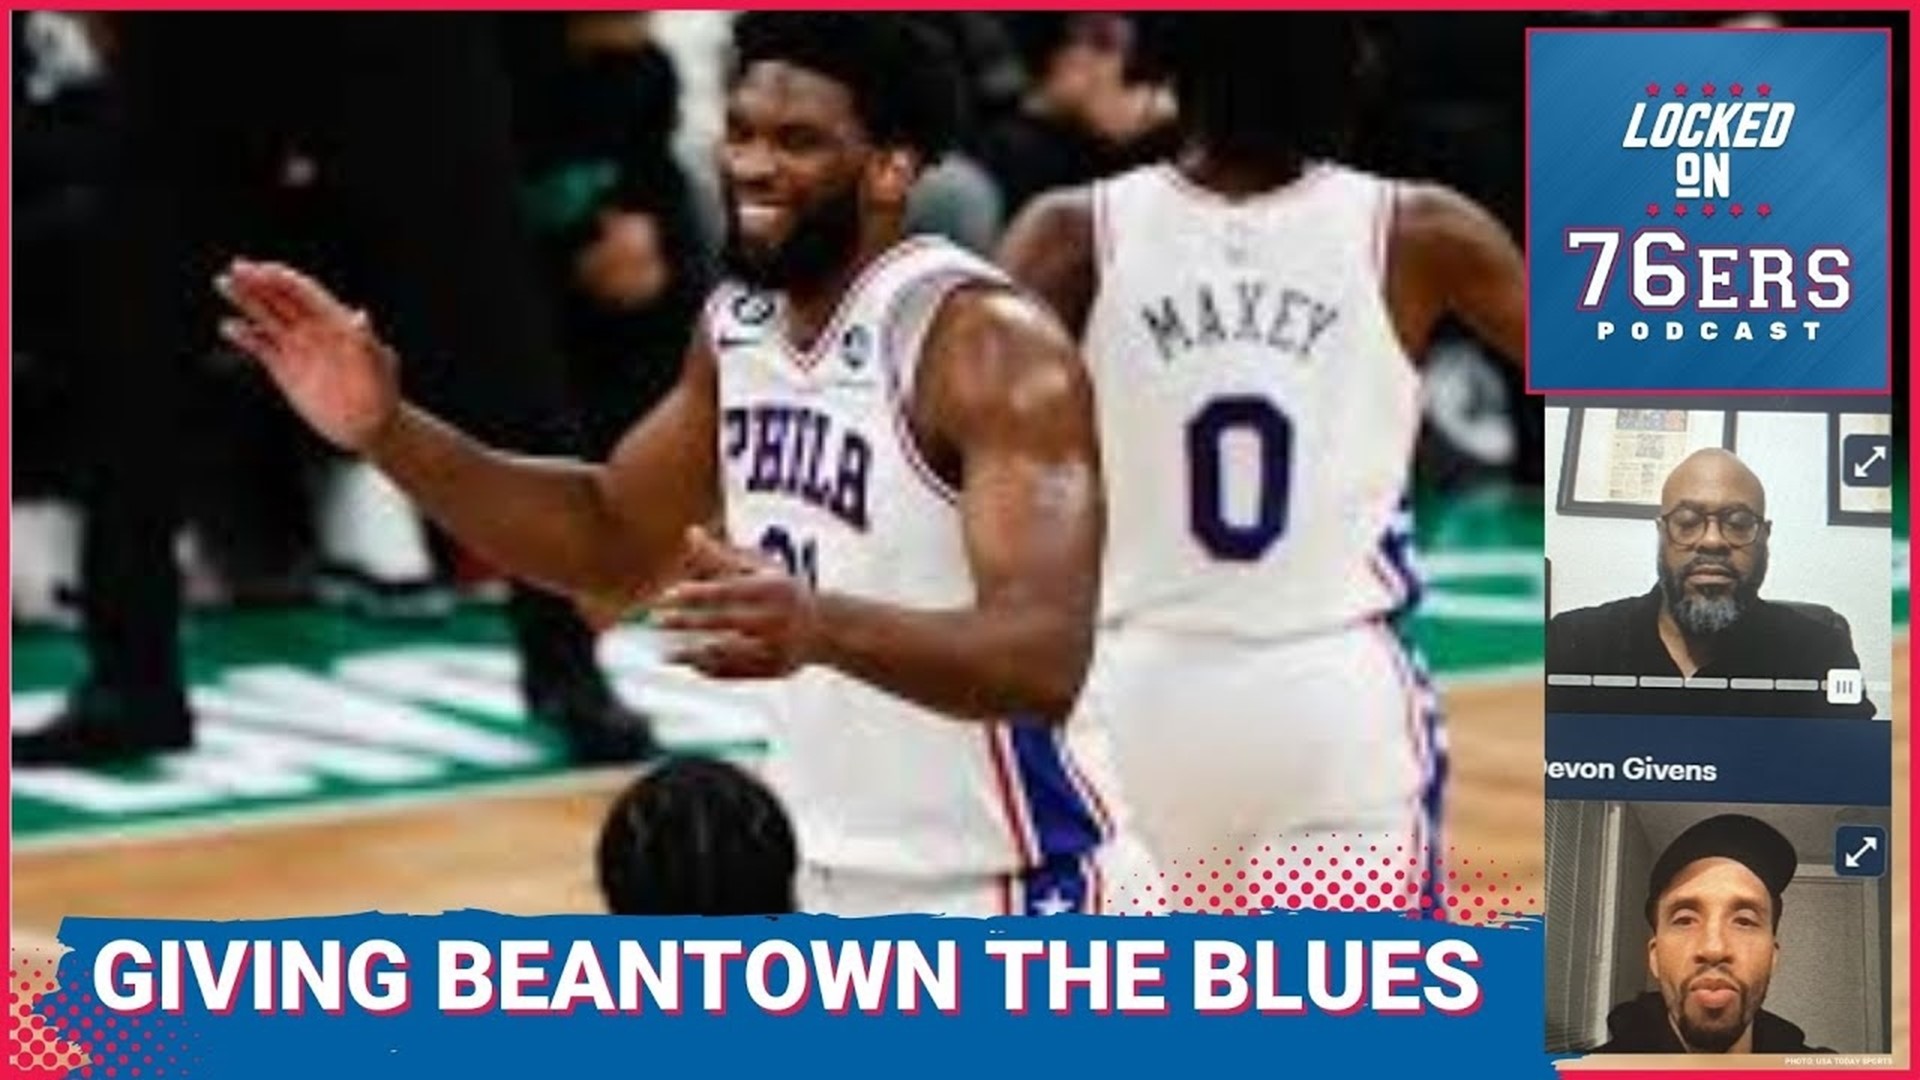 This victory also marked the first time the Sixers won a Game 5 in a conference semifinal since 2001. Devon Givens and Keith Pompey talk about all this and more